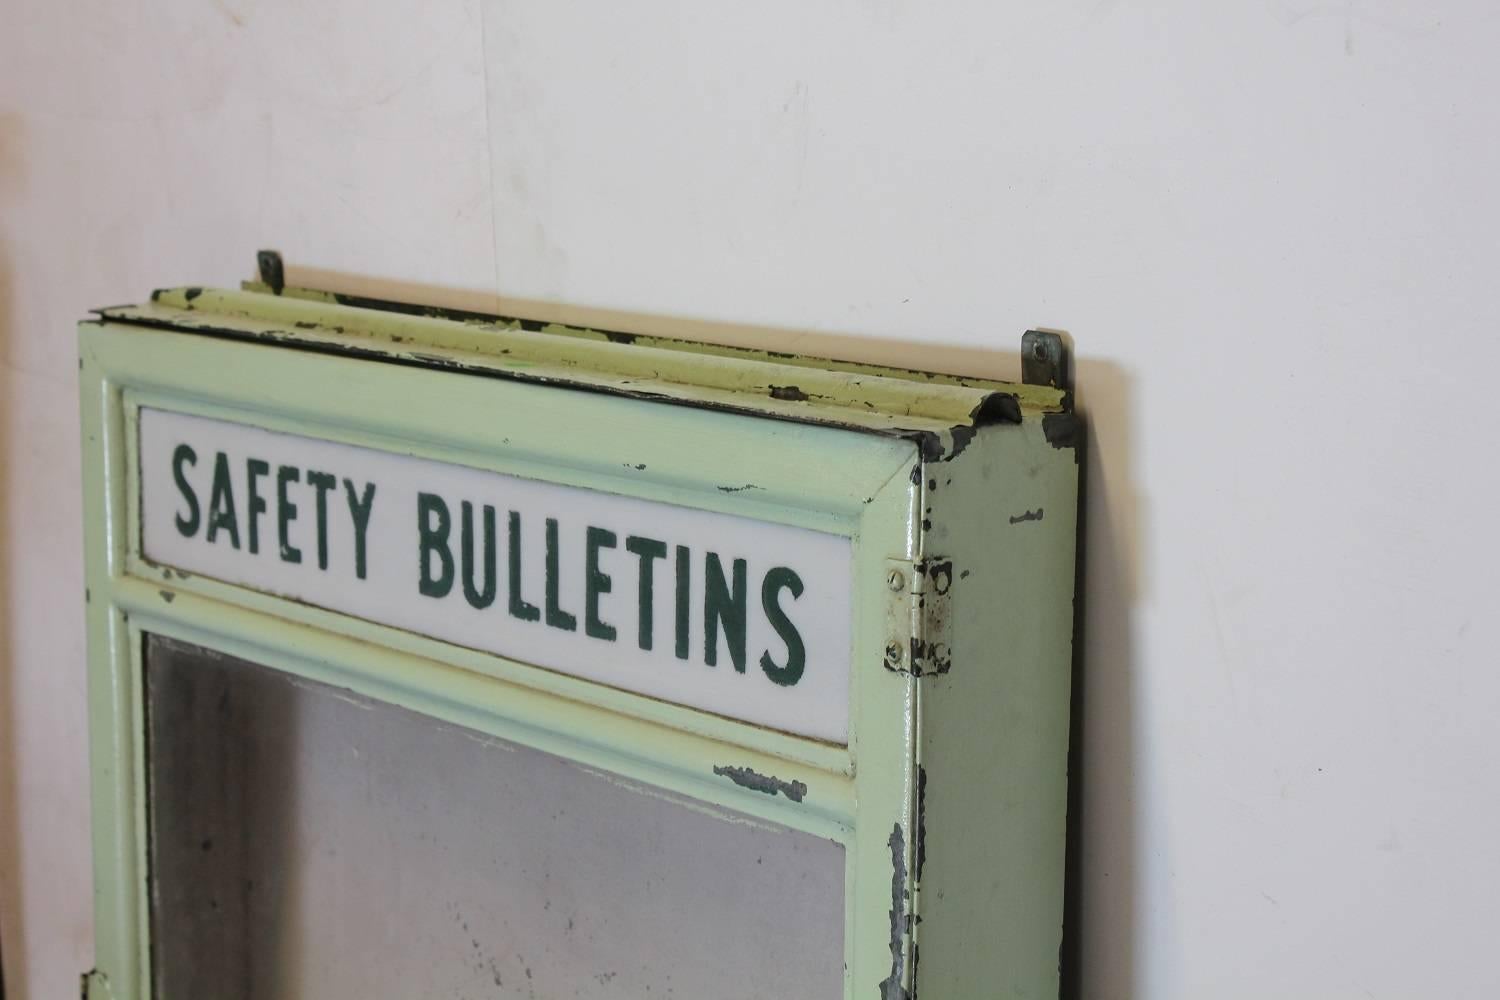 1930s safety bulletins message shadow box with original milk glass sign.